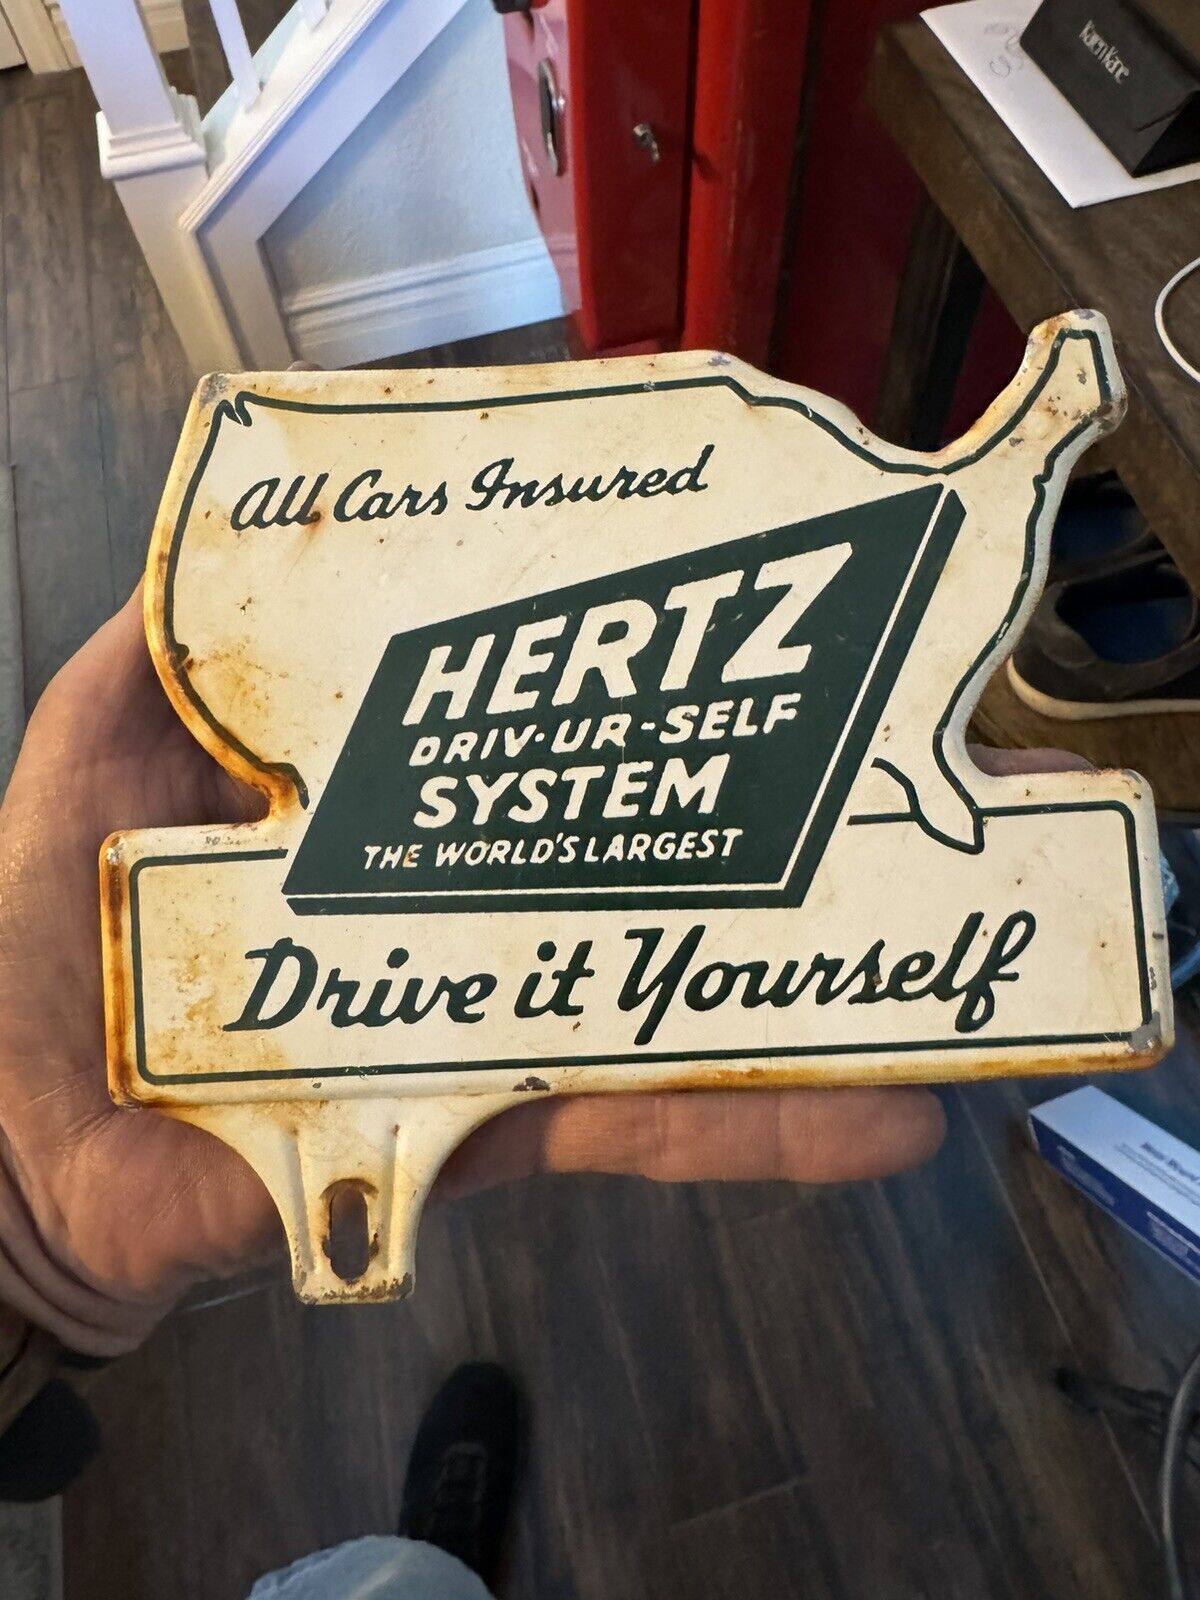 Hertz drive it yourself 7” Metal Plate Topper Dealership Gas Oil Sign Station Tr